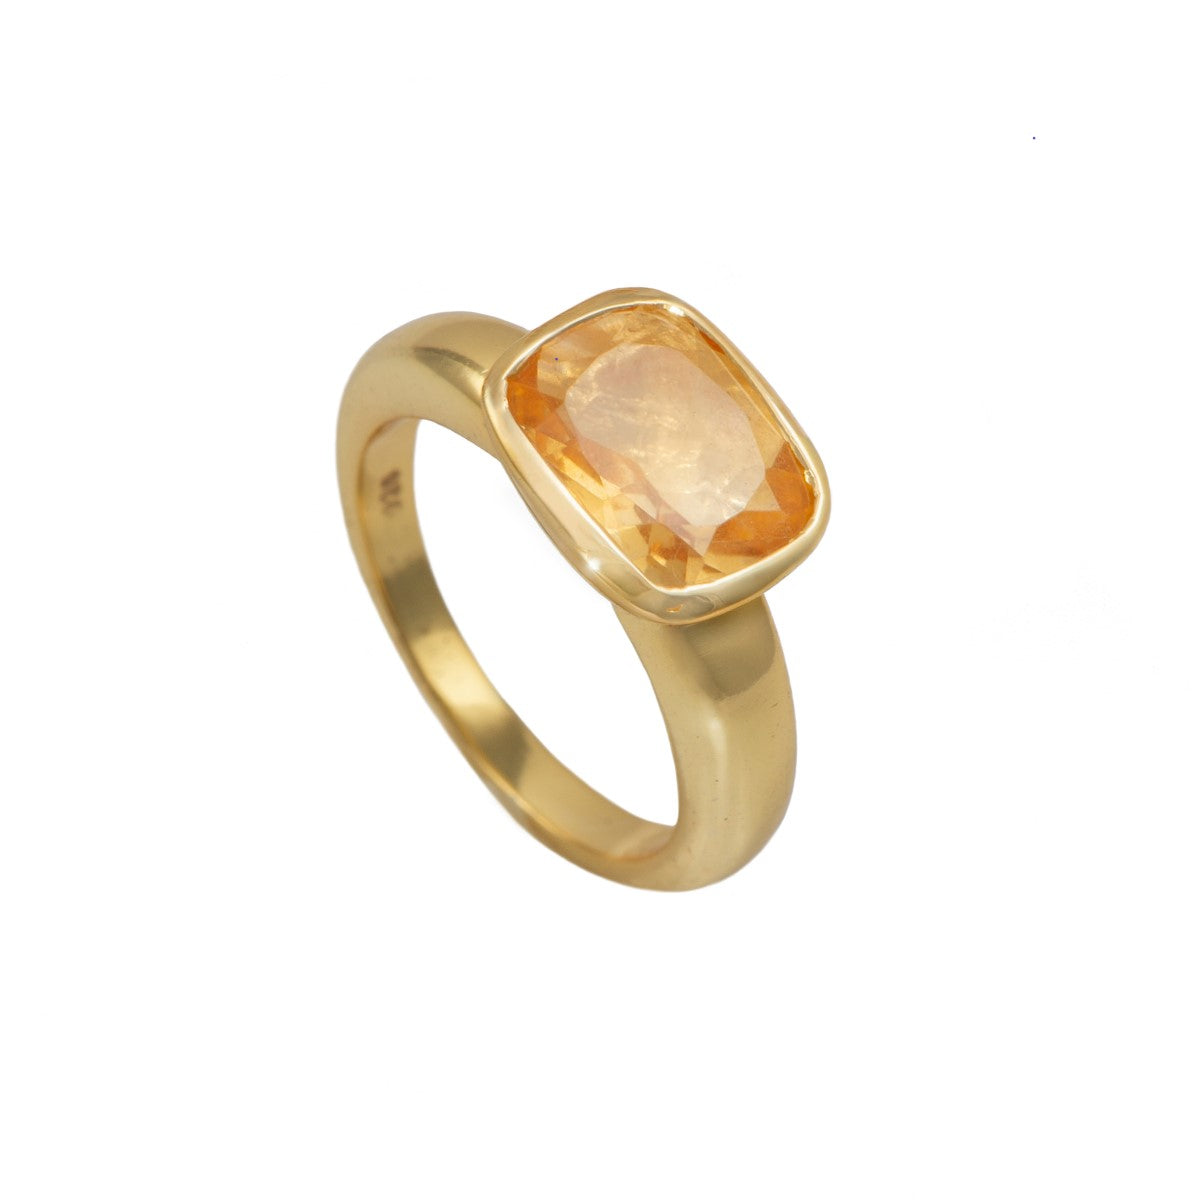 Faceted Rectangular Cut Natural Gemstone Gold Plated Sterling Silver Ring - Citrine